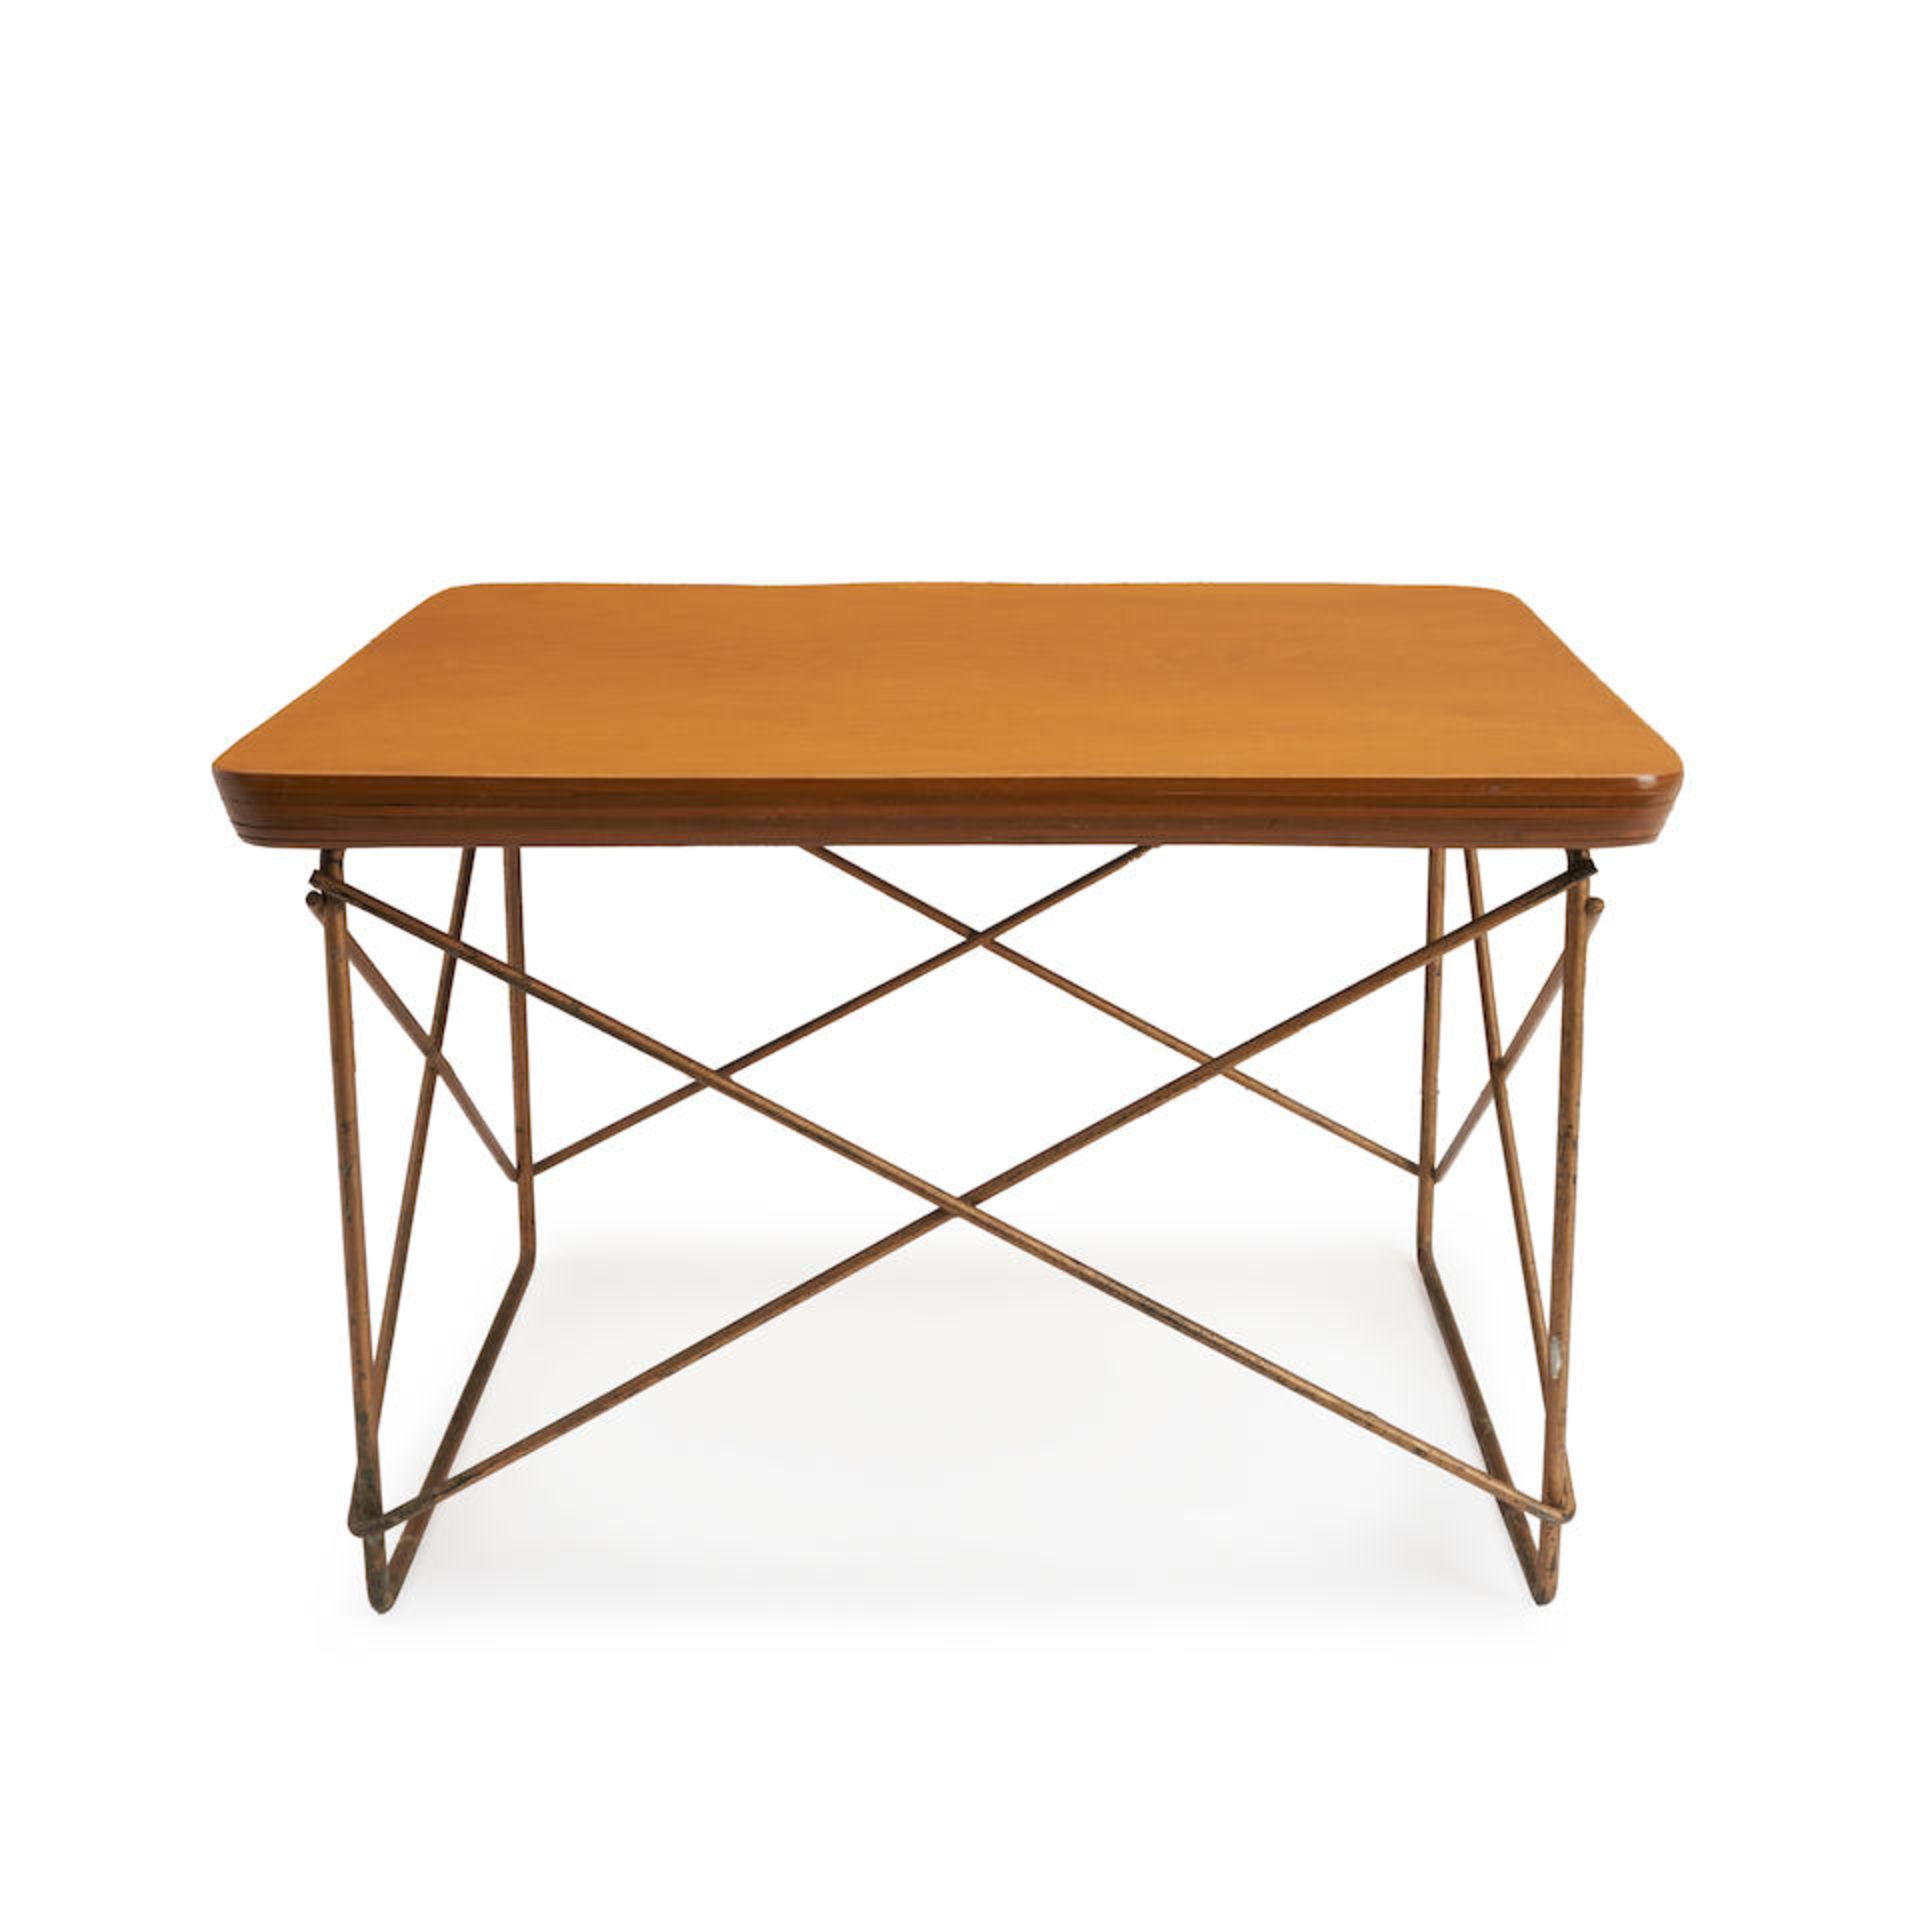 CHARLES AND RAY EAMES FOR HERMAN MILLER WIRE BASE LOW TABLE, early 1950s, birch laminate, metal,...